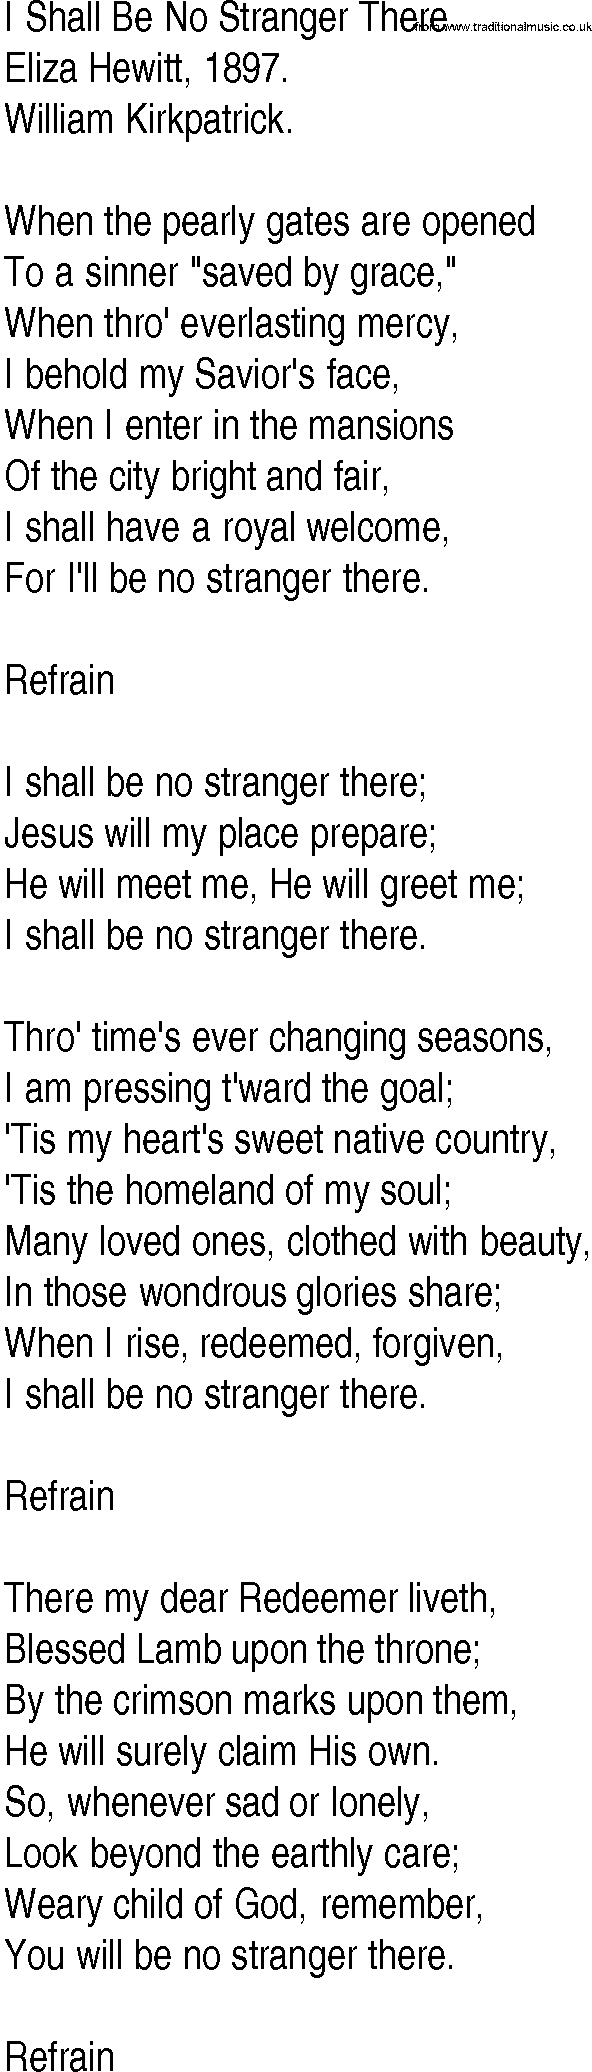 Hymn and Gospel Song: I Shall Be No Stranger There by Eliza Hewitt lyrics